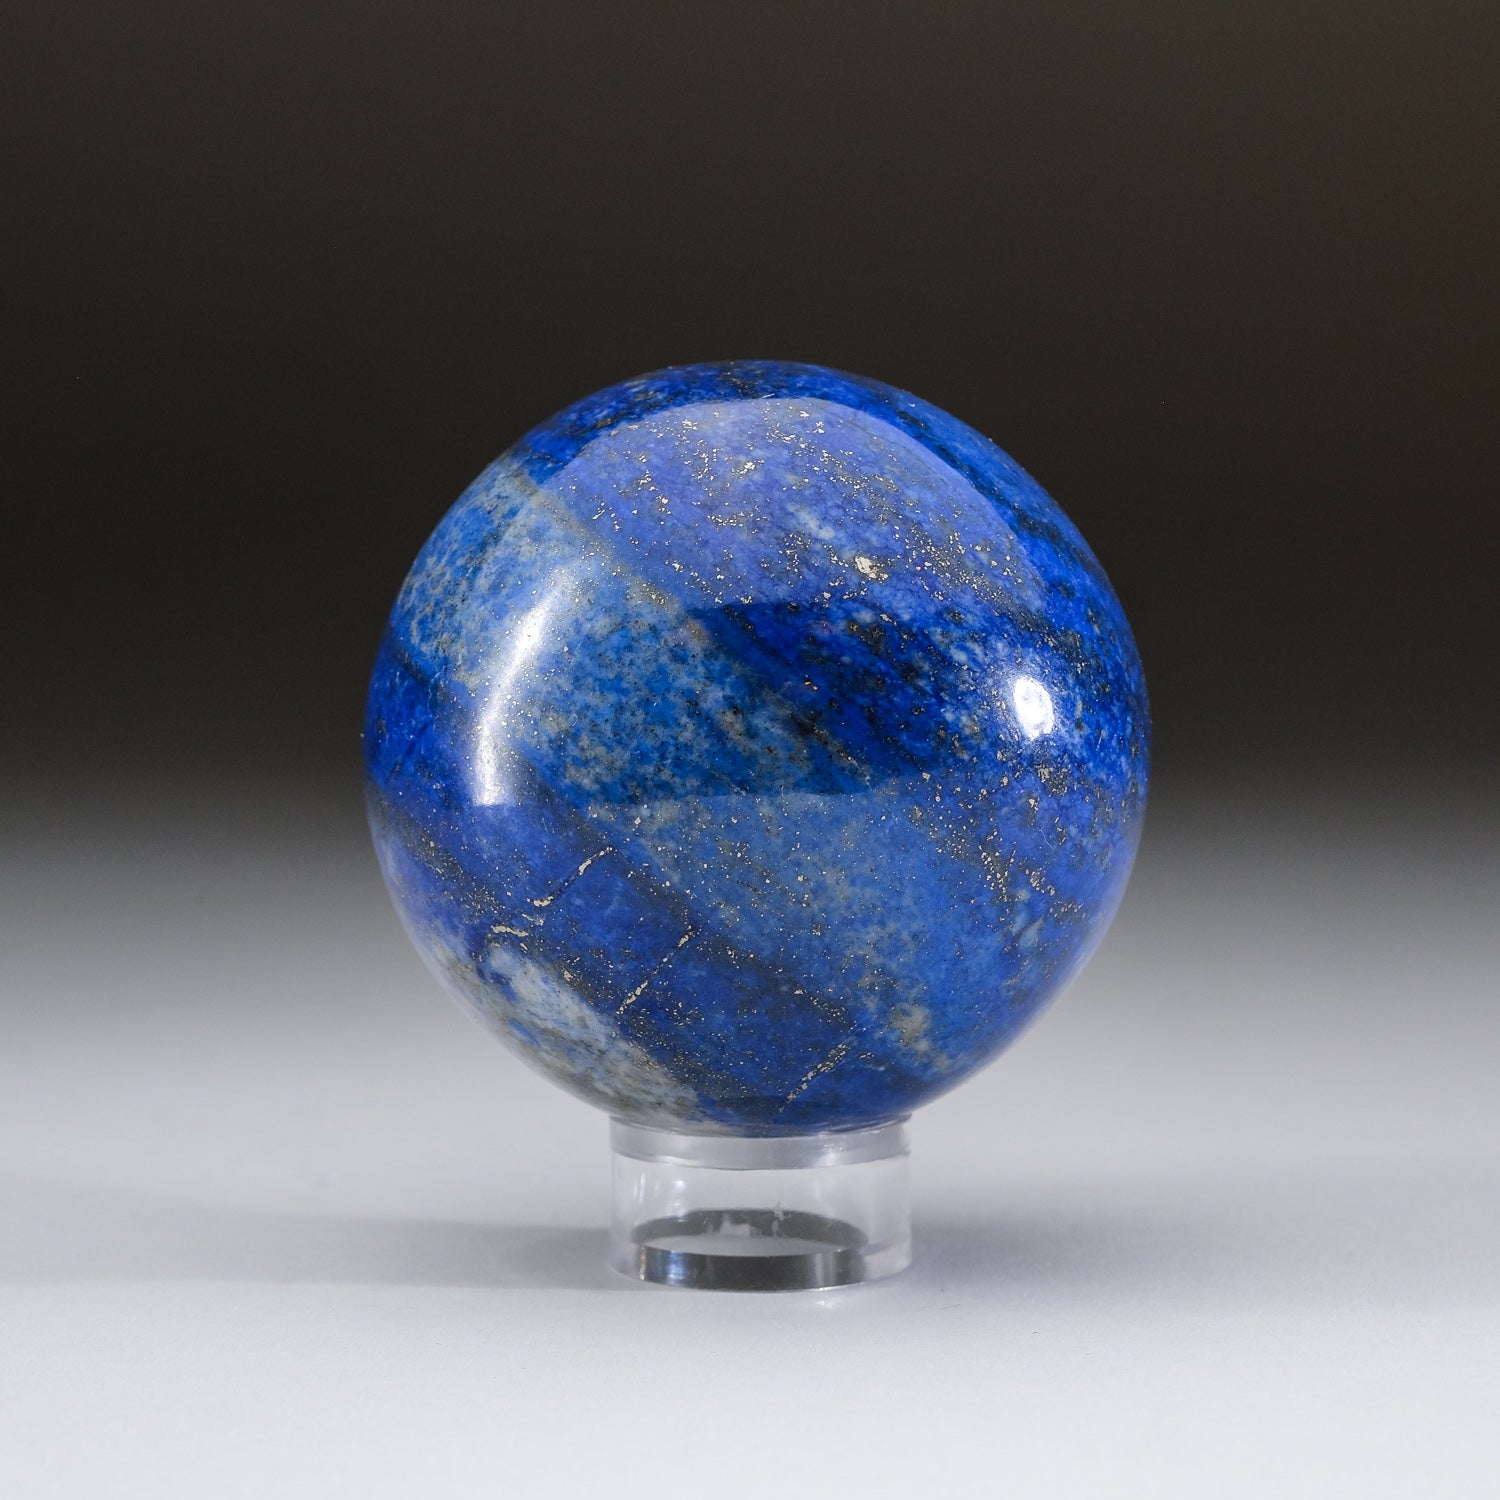 Polished Lapis Lazuli Sphere from Afghanistan (2.5", 435.7 grams)